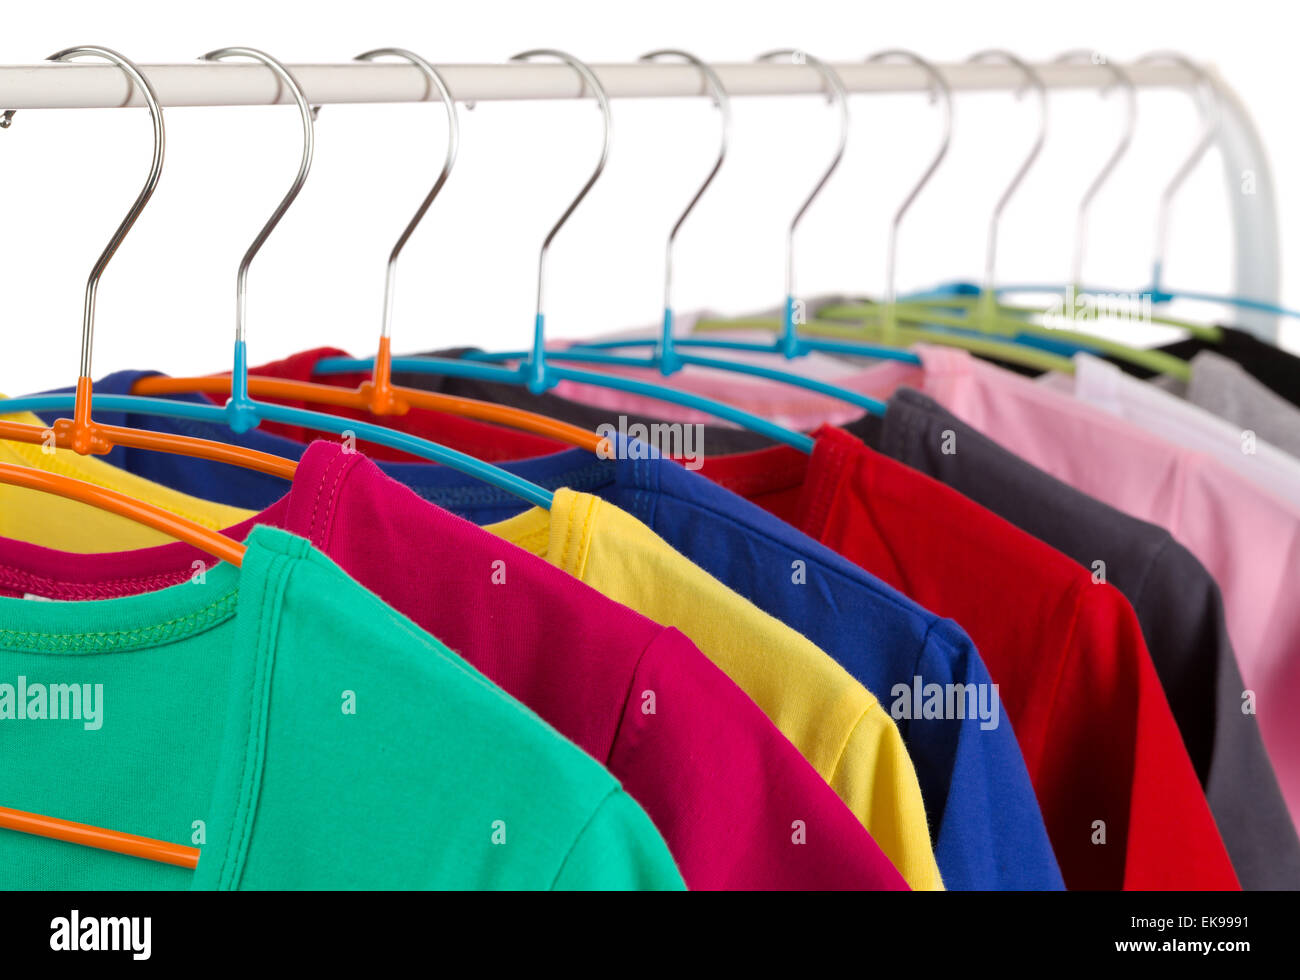 Colorful shirts on hangers, isolate on white. Stock Photo